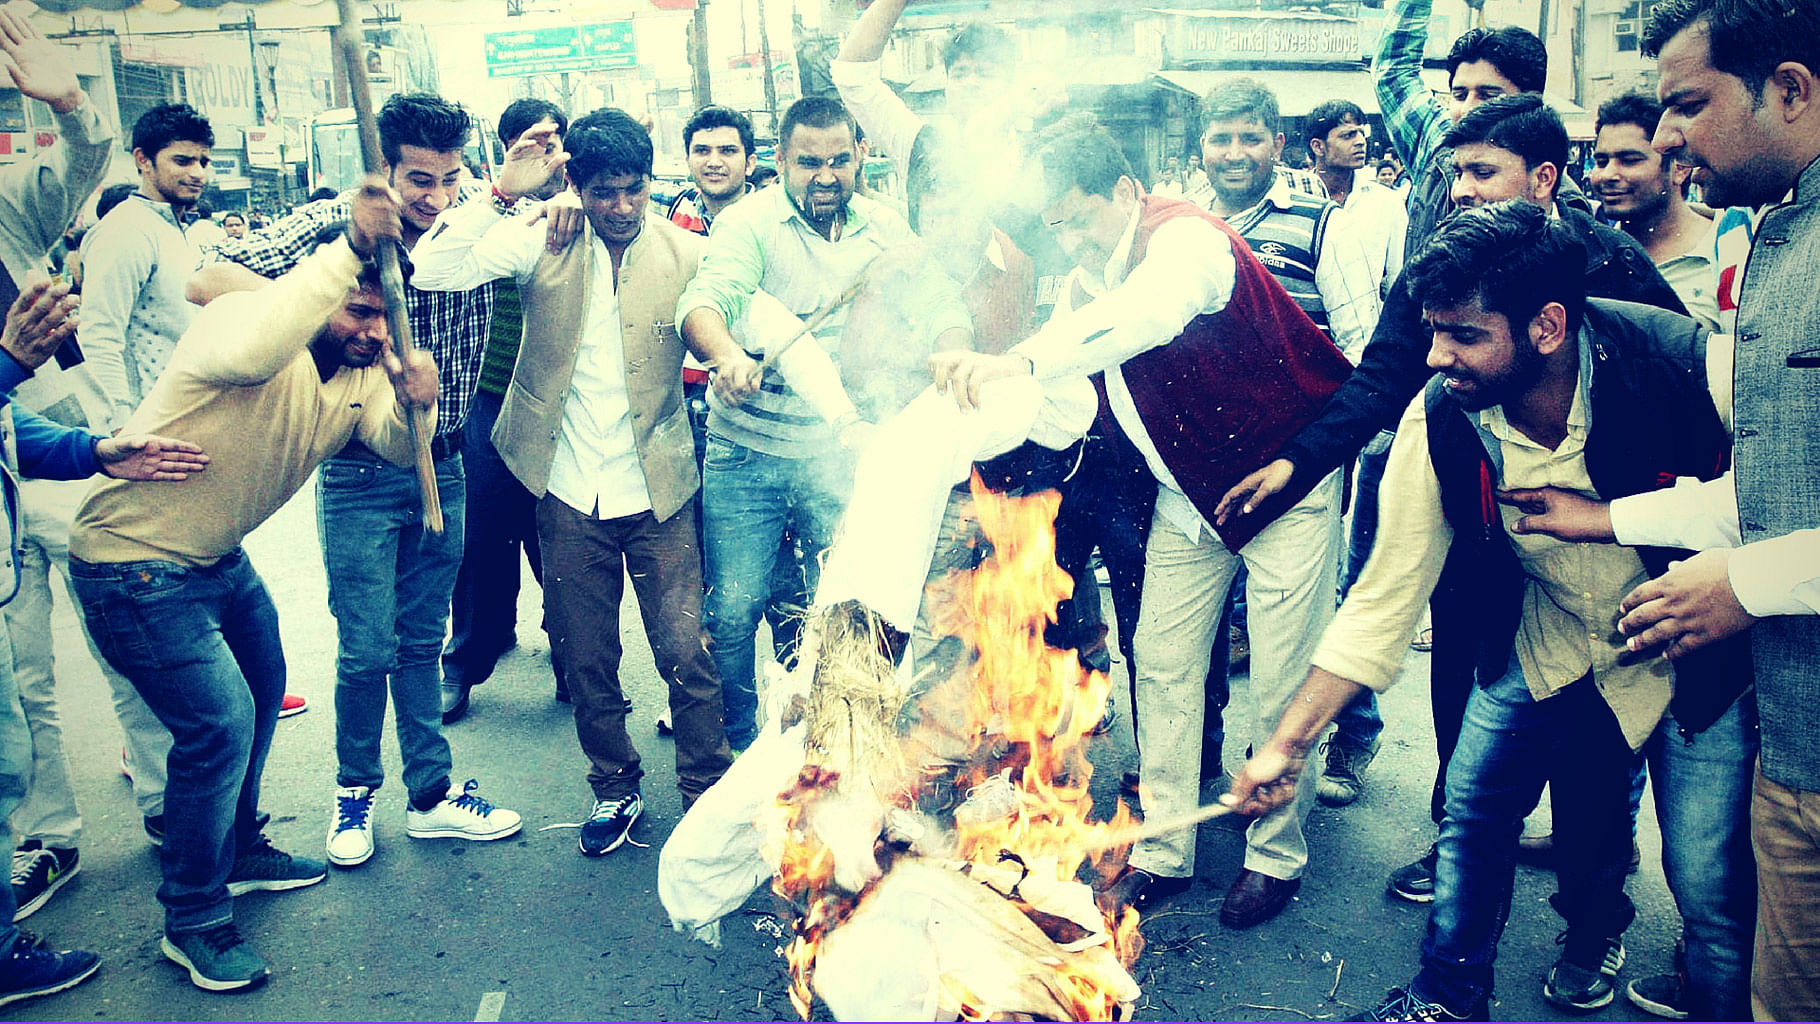 Protestors demanding reservation for Jats in government jobs burn the effigy of Haryana Chief Minister Manohar Lal Khattar in Meerut on Saturday. (Photo: PTI)